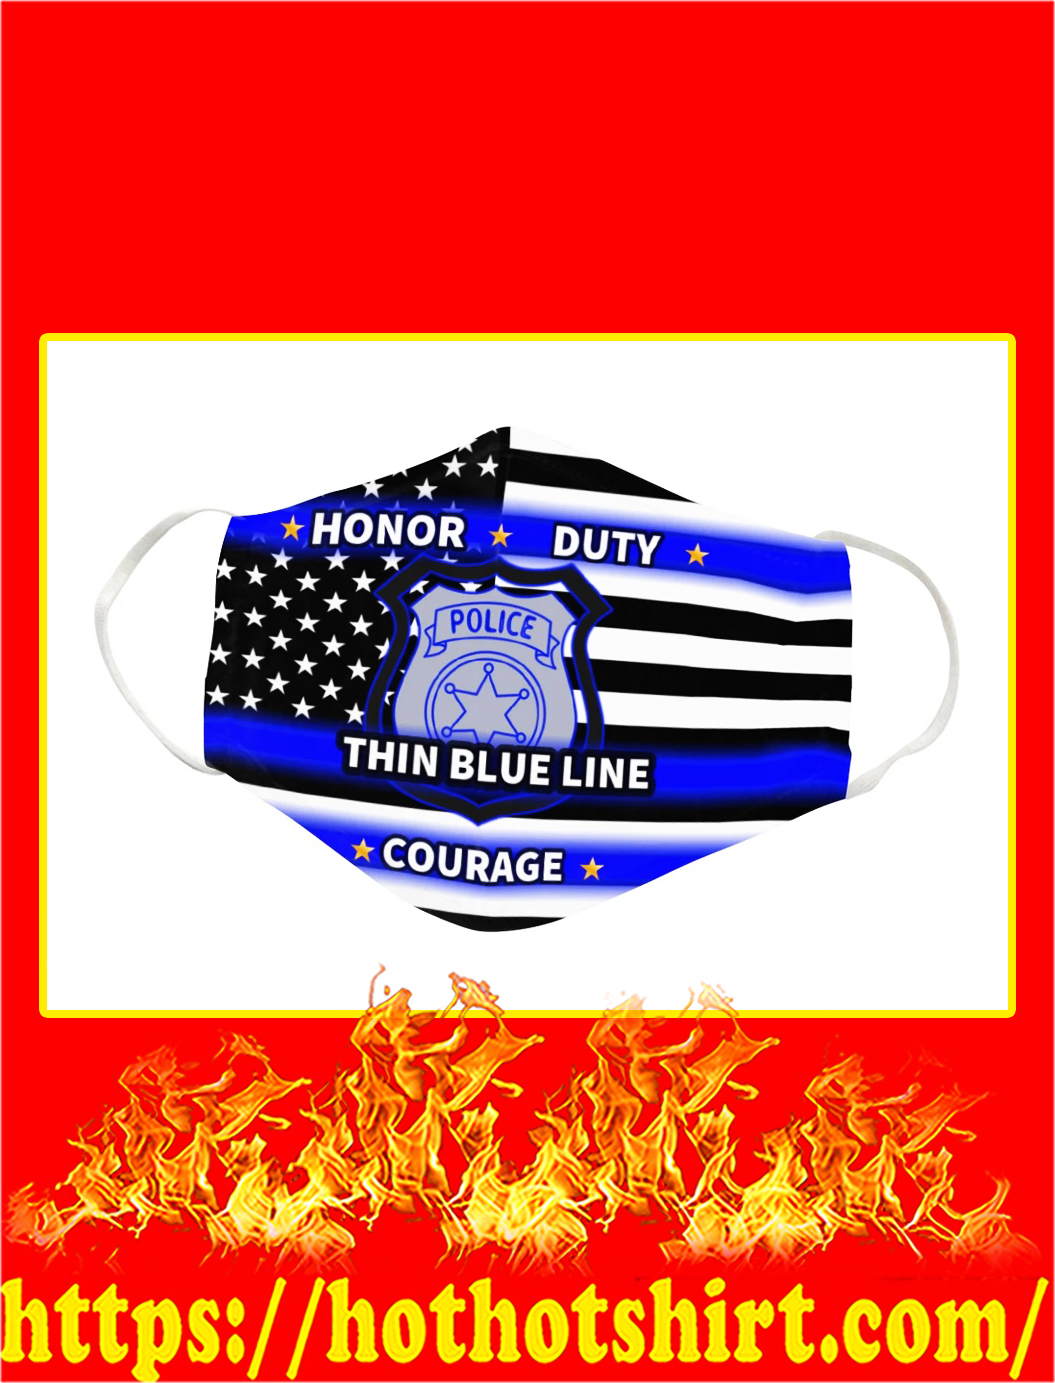 Police thin blue line honor duty courage face mask